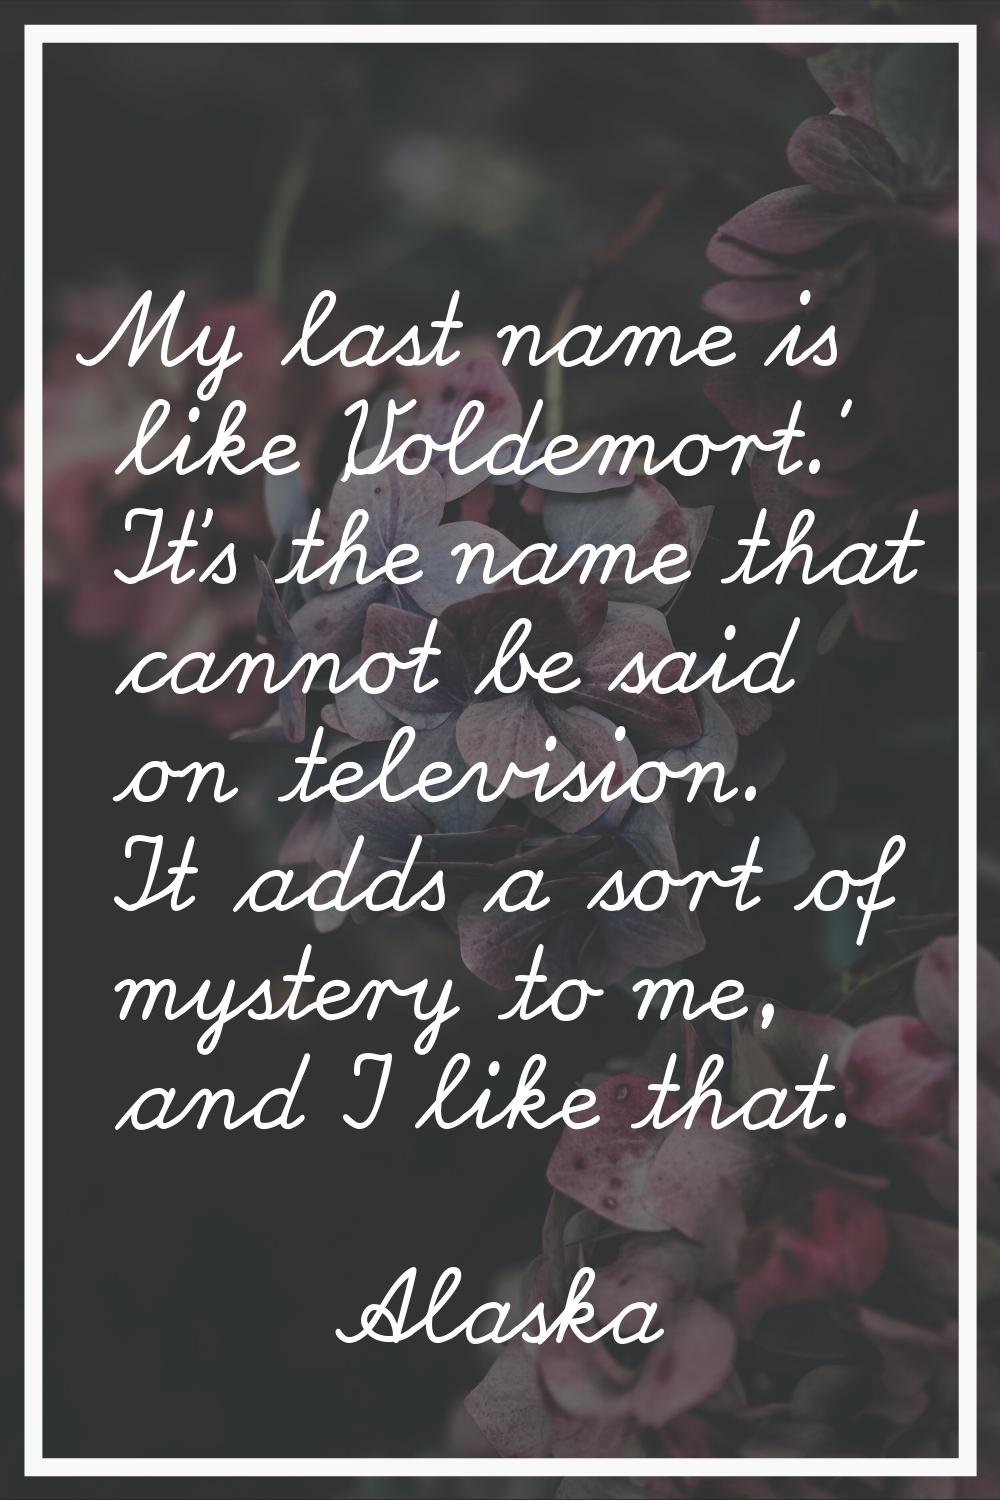 My last name is like 'Voldemort.' It's the name that cannot be said on television. It adds a sort o